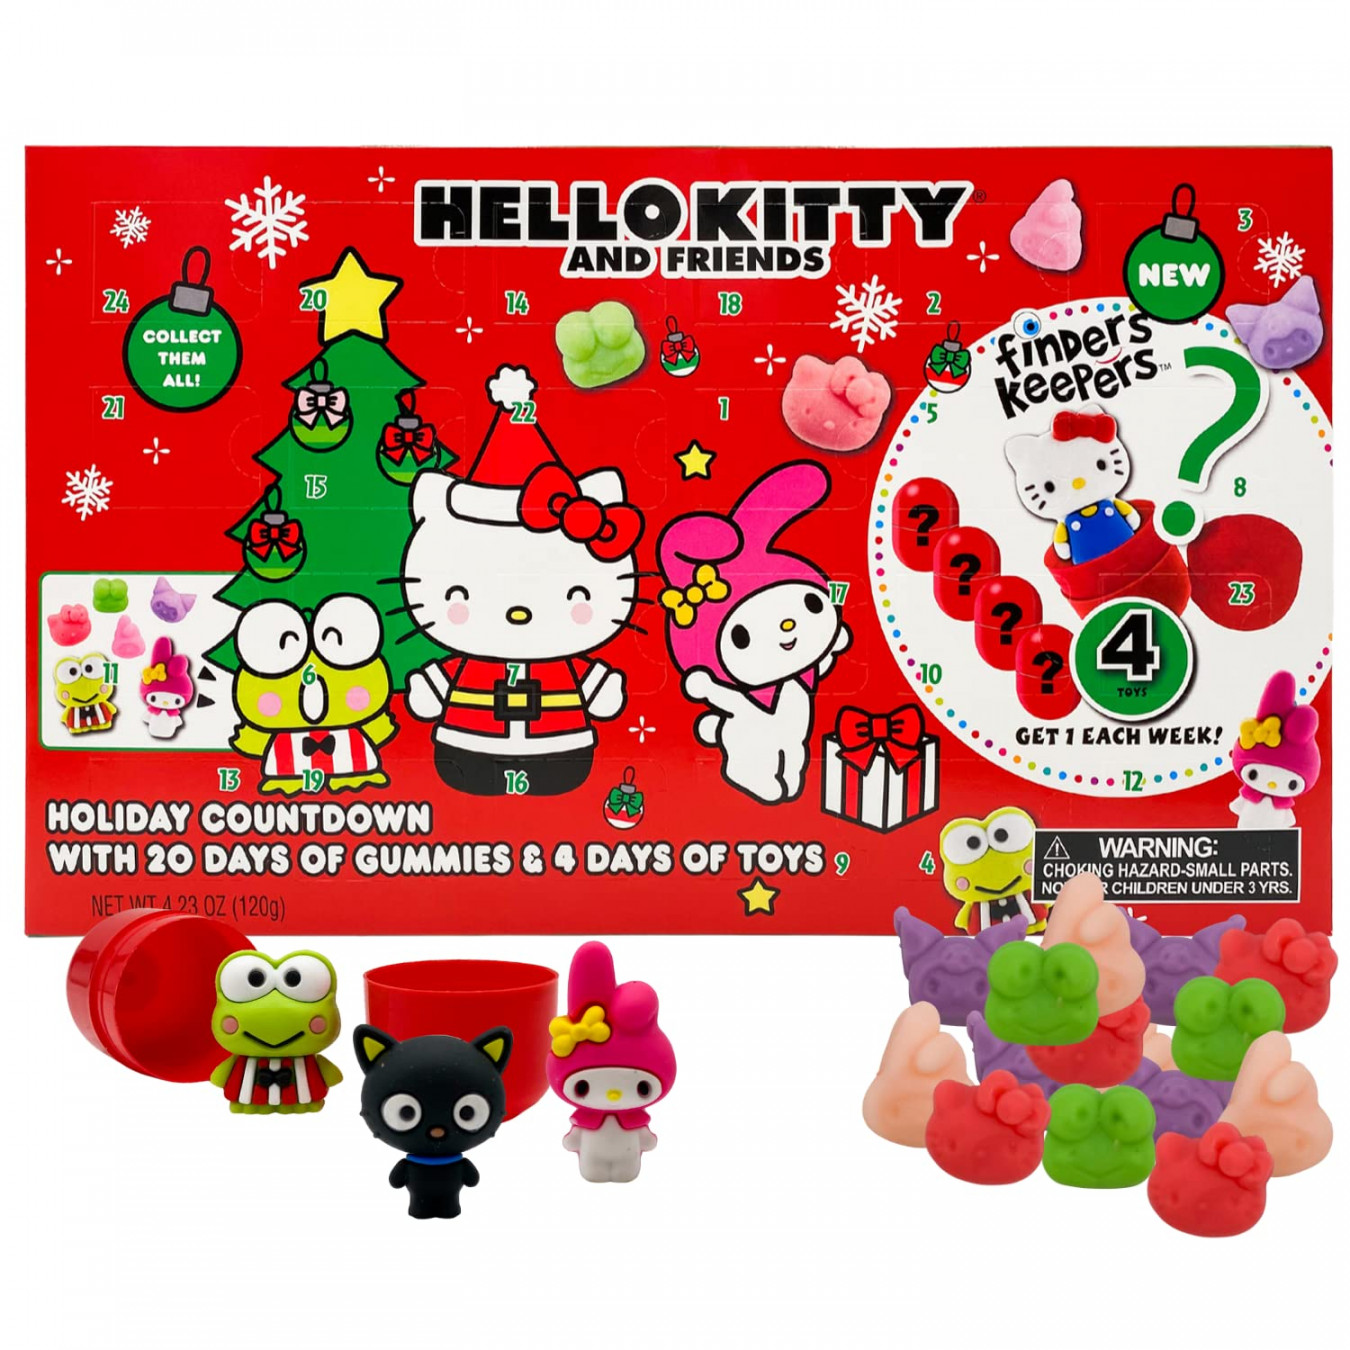 Galerie Hello Kitty Finders Keepers Advent Calendar,  Countdown to  Christmas with Gummy Candies and Toys,  Days